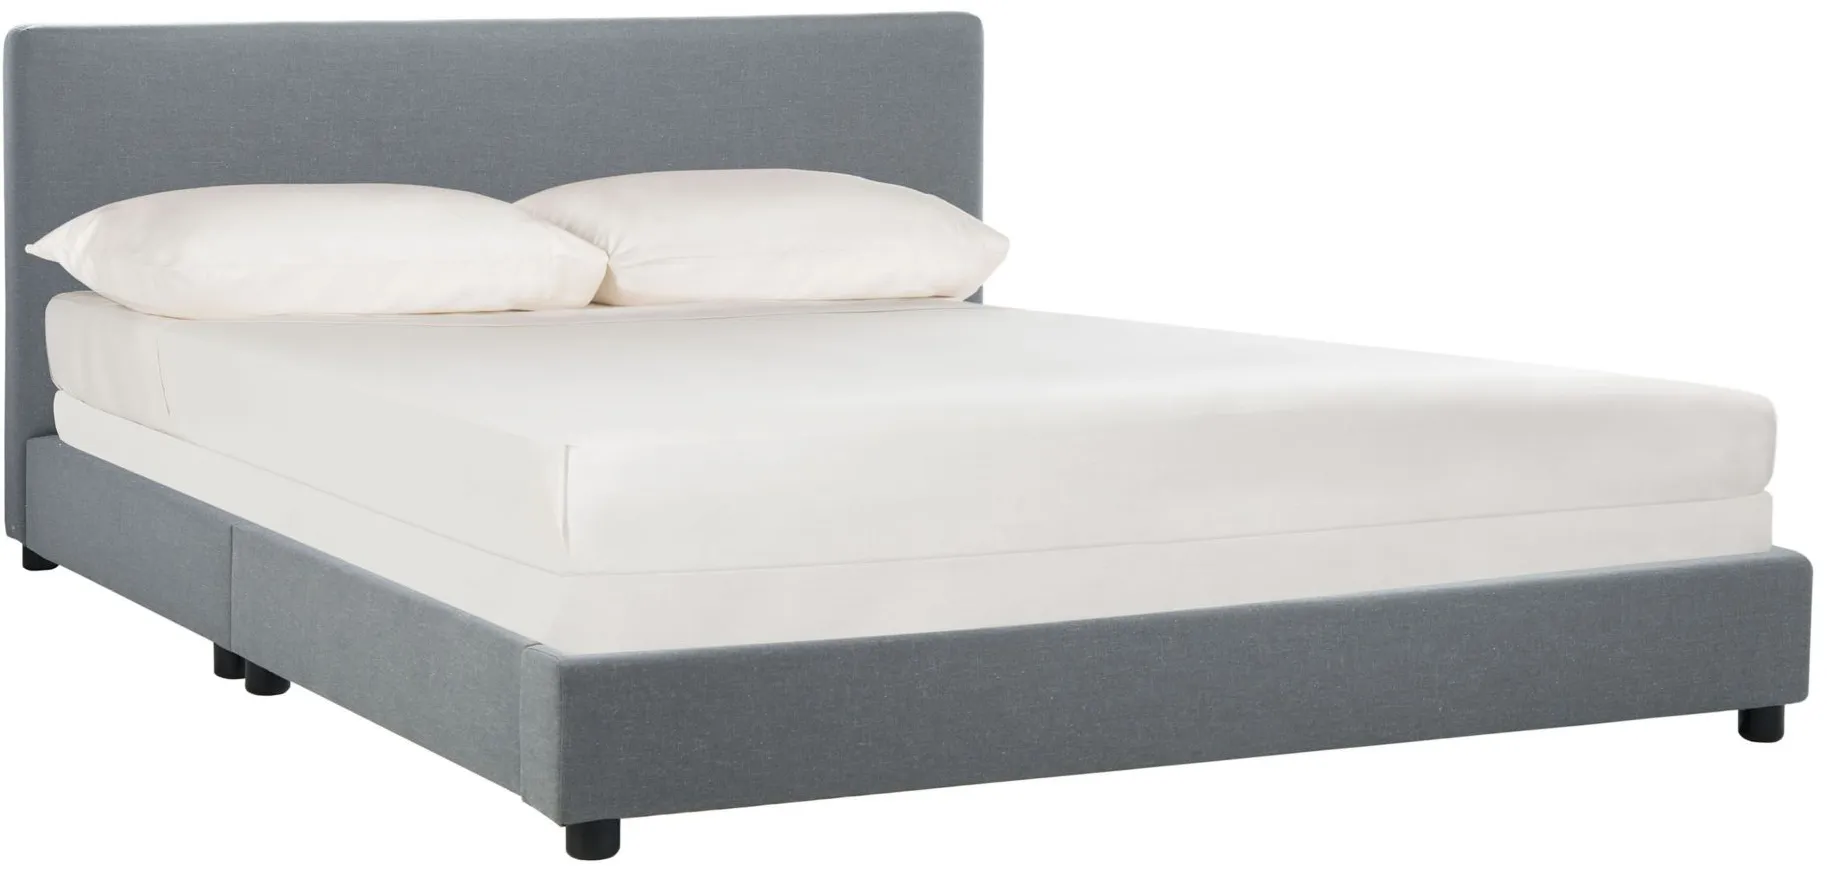 Carter Upholstered Bed in Gray Linen by Safavieh